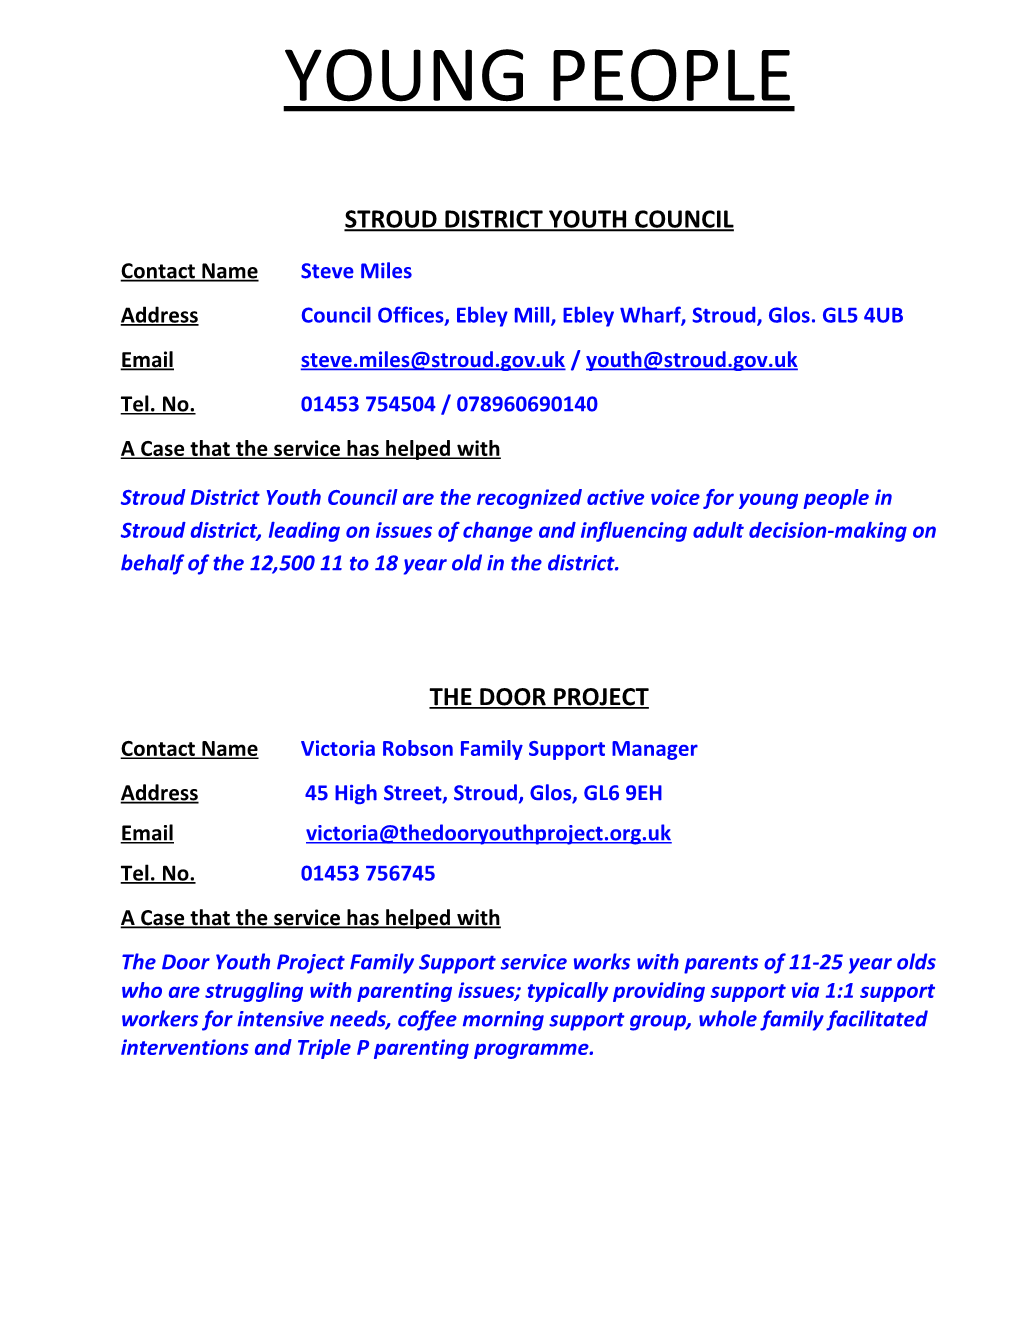 Stroud District Youth Council